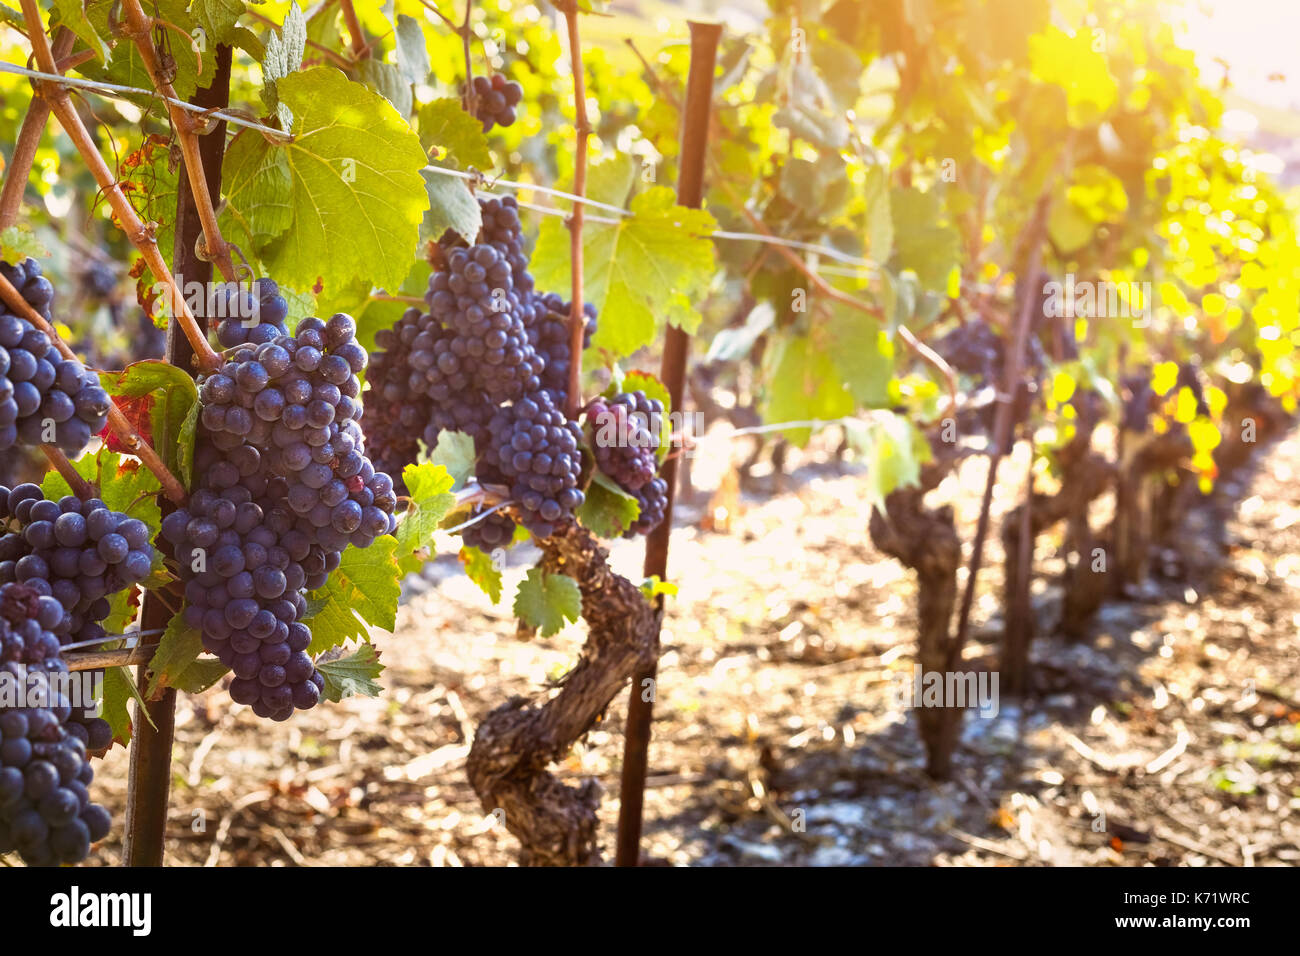 Bunch of ripe black grape on the vine in sunny autumn vineyards before harvest Stock Photo